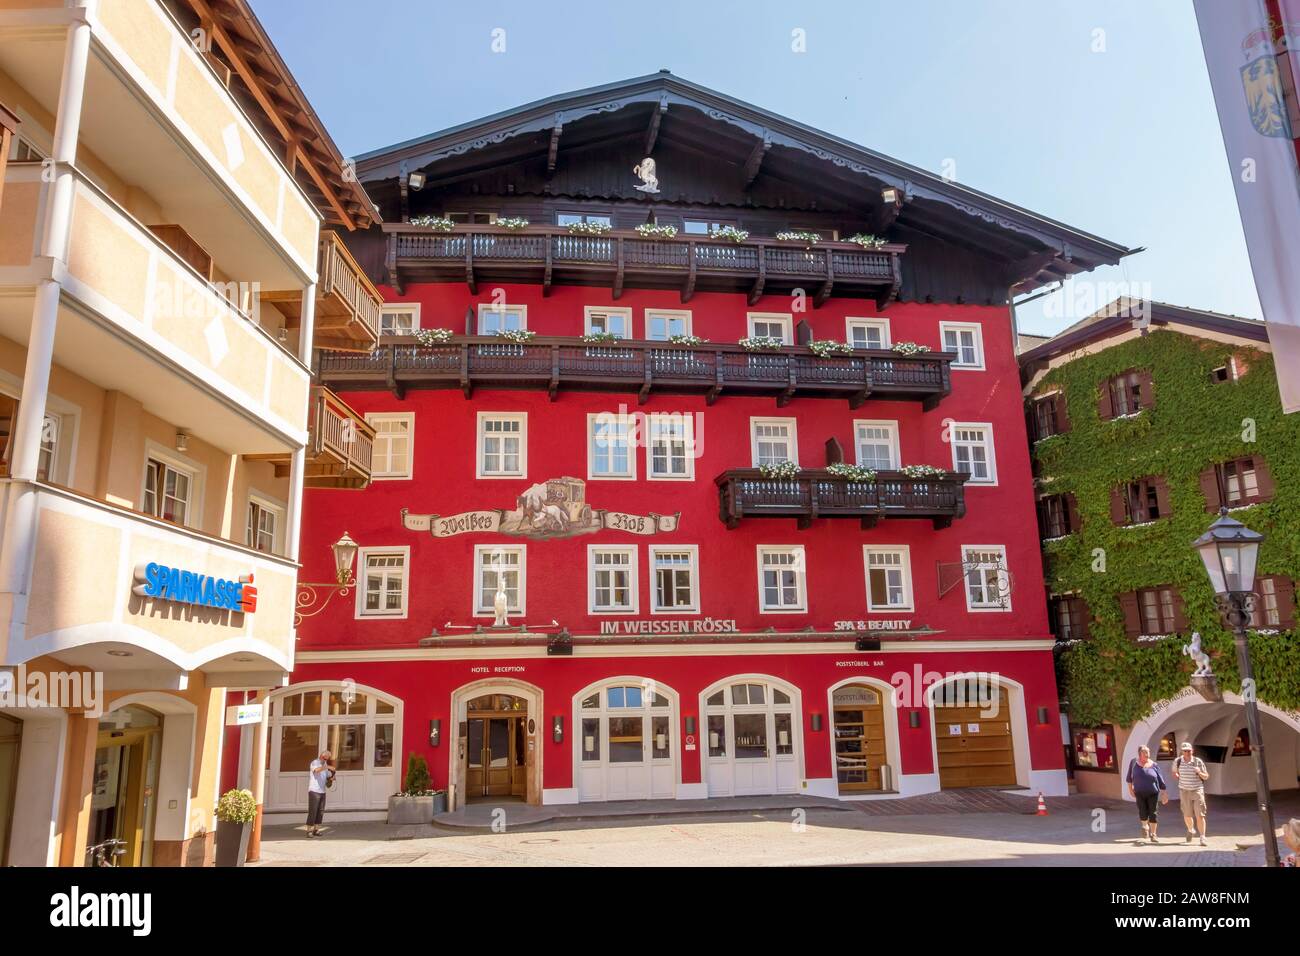 St. Wolfgang, Austria - June 23, 2014: Hotel Weisses Roessl at the famous lake Wolfgangsee. Popular travel destination within Austria. Stock Photo